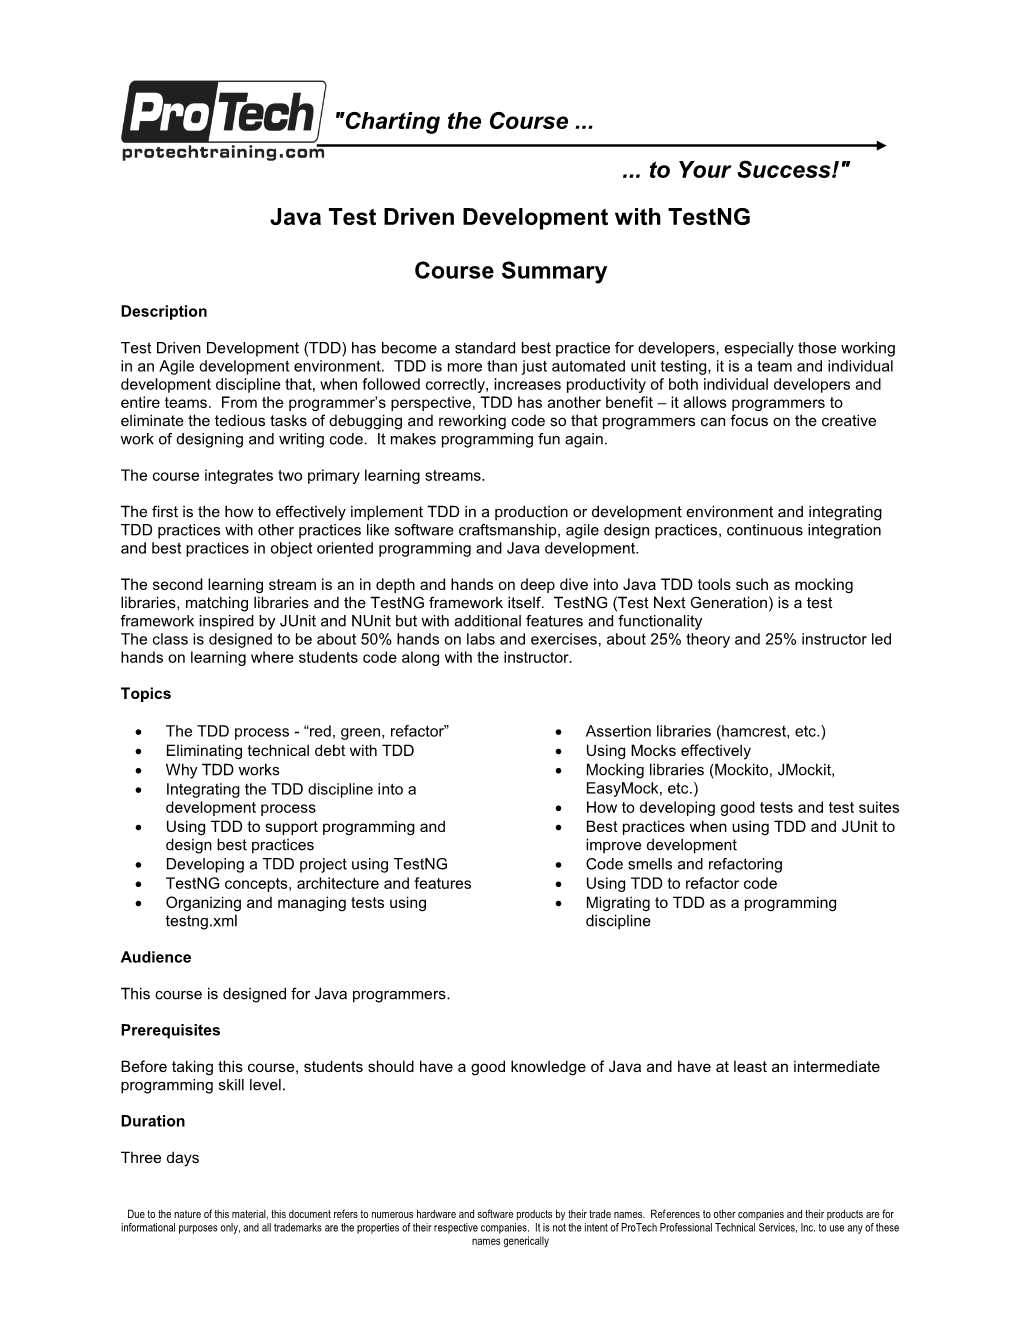 Java Test Driven Development with Testng